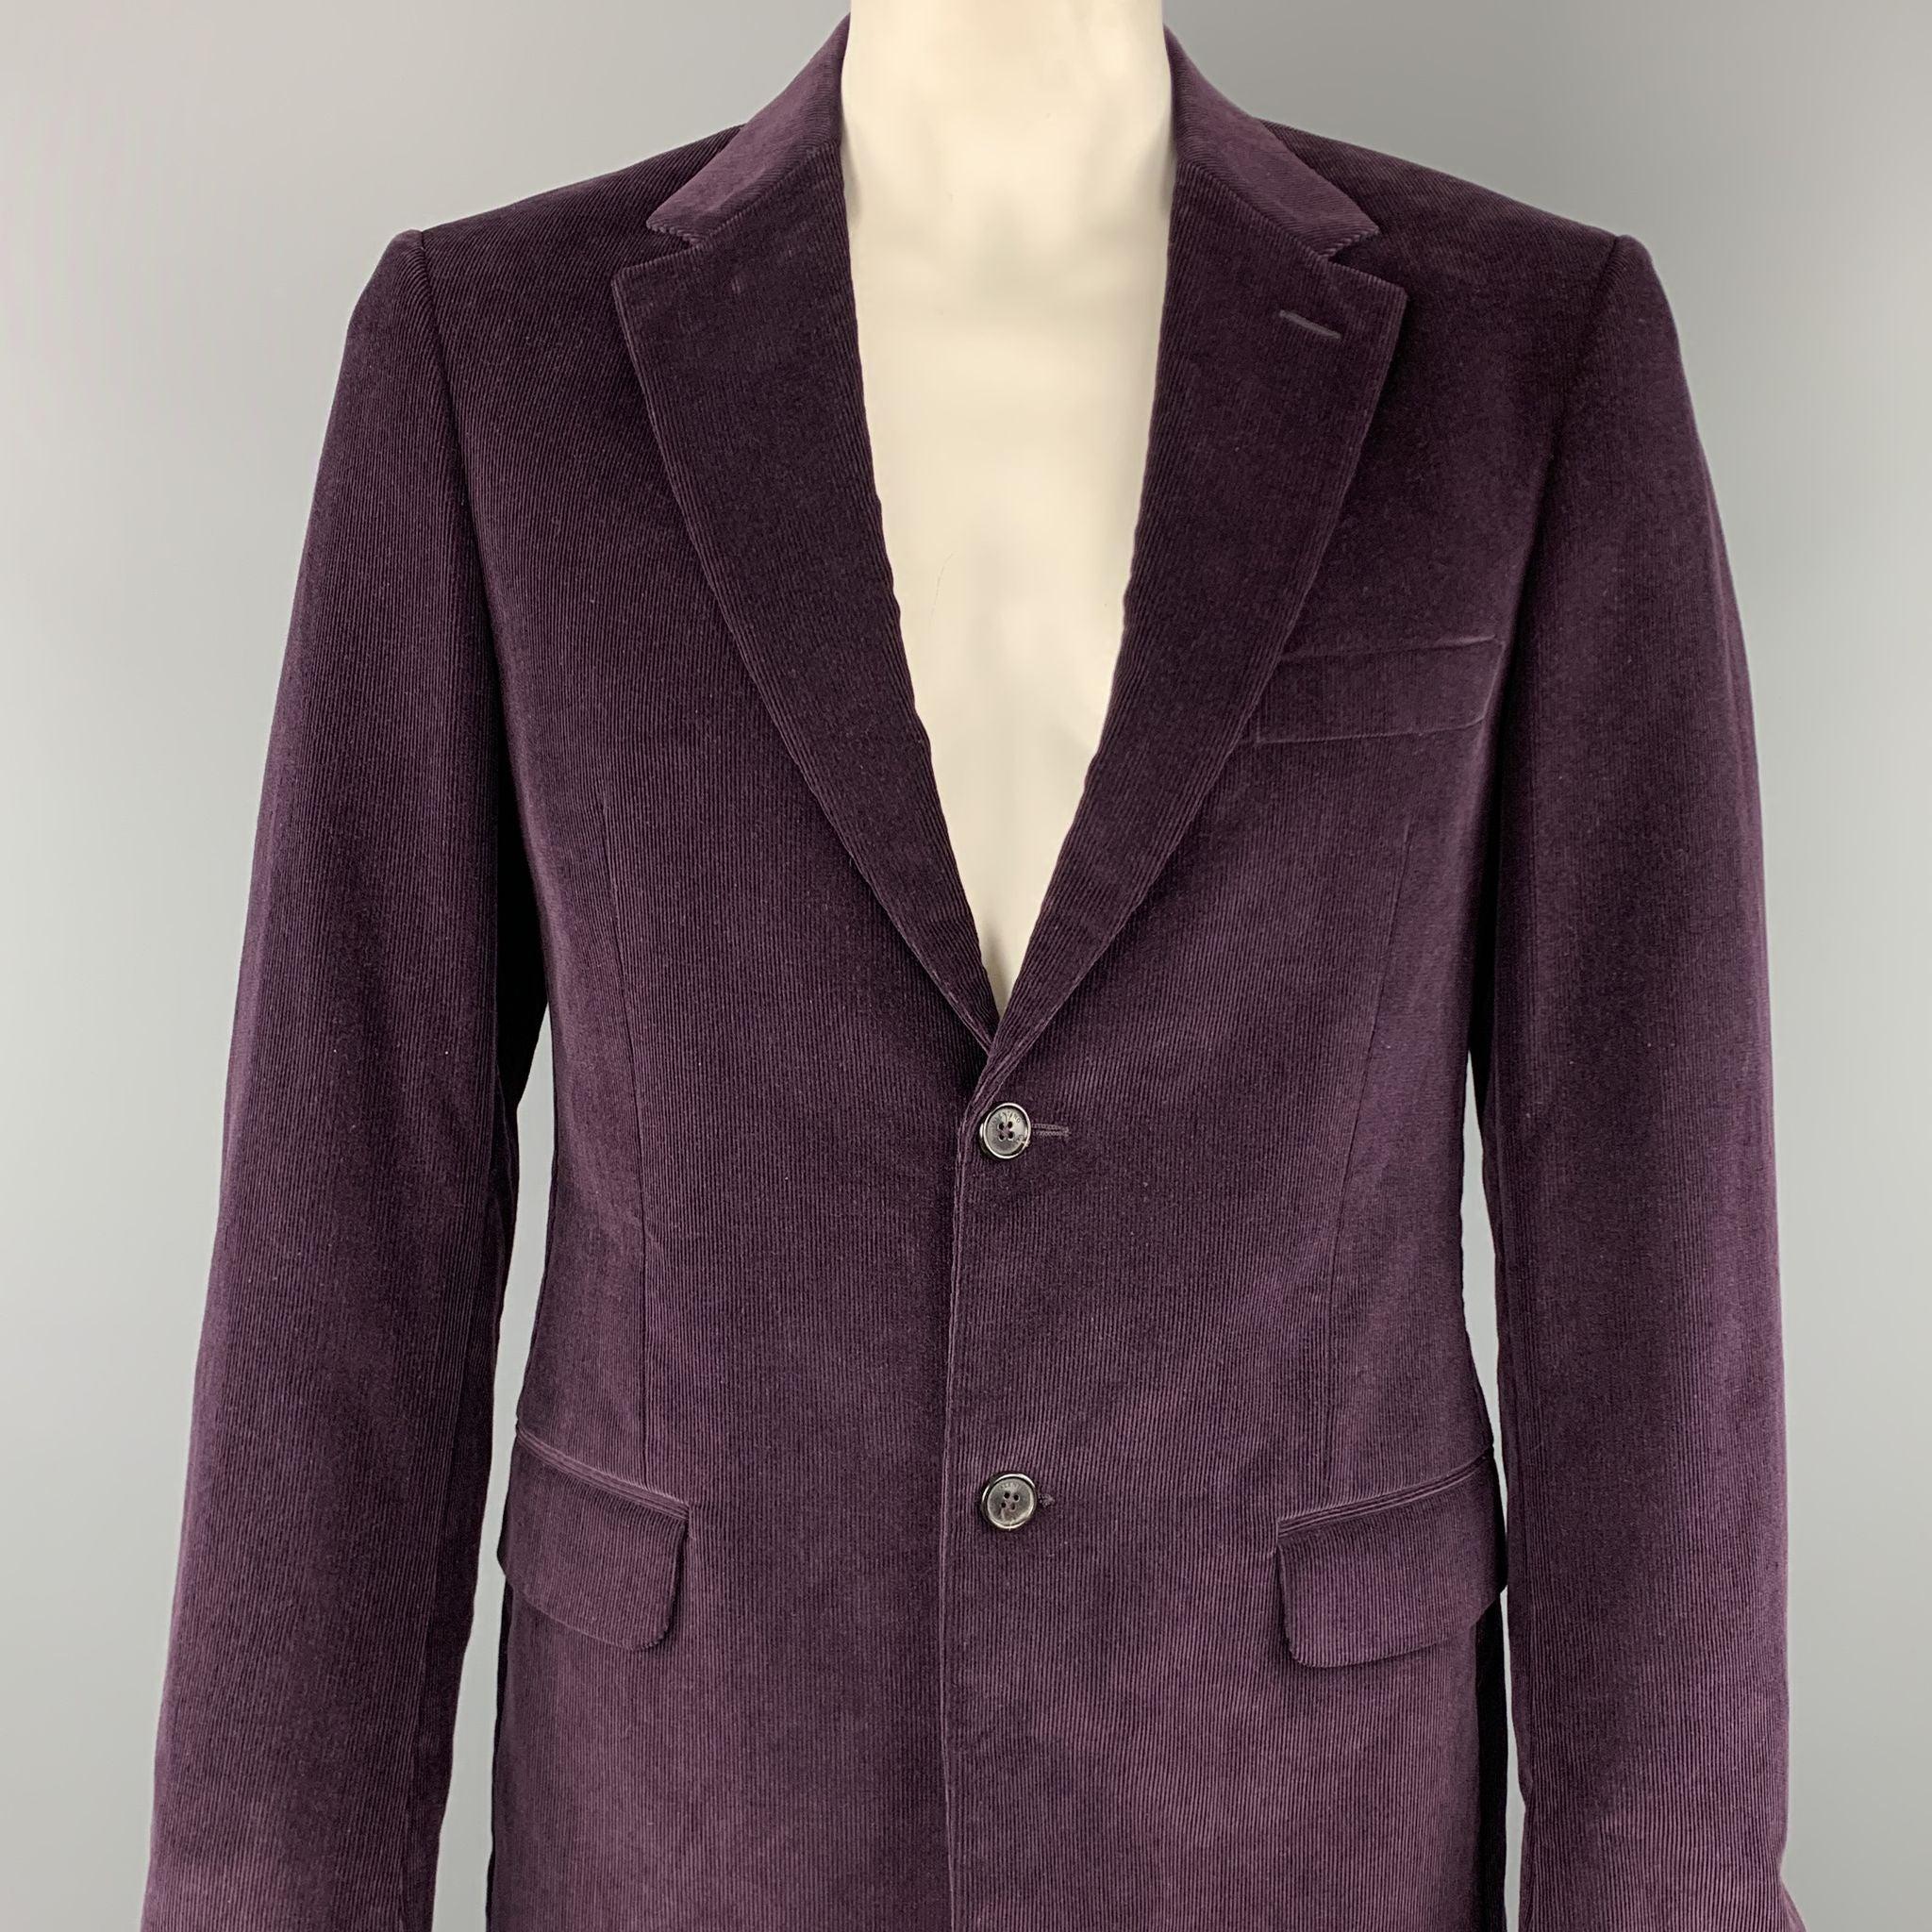 VALENTINO sport coat comes in a purple corduroy cotton with a full liner featuring a notch lapel, flap pockets, single back vent, and a double button closure. Made in Italy.
Excellent
Pre-Owned Condition. 

Marked:   40/50 R 

Measurements: 
